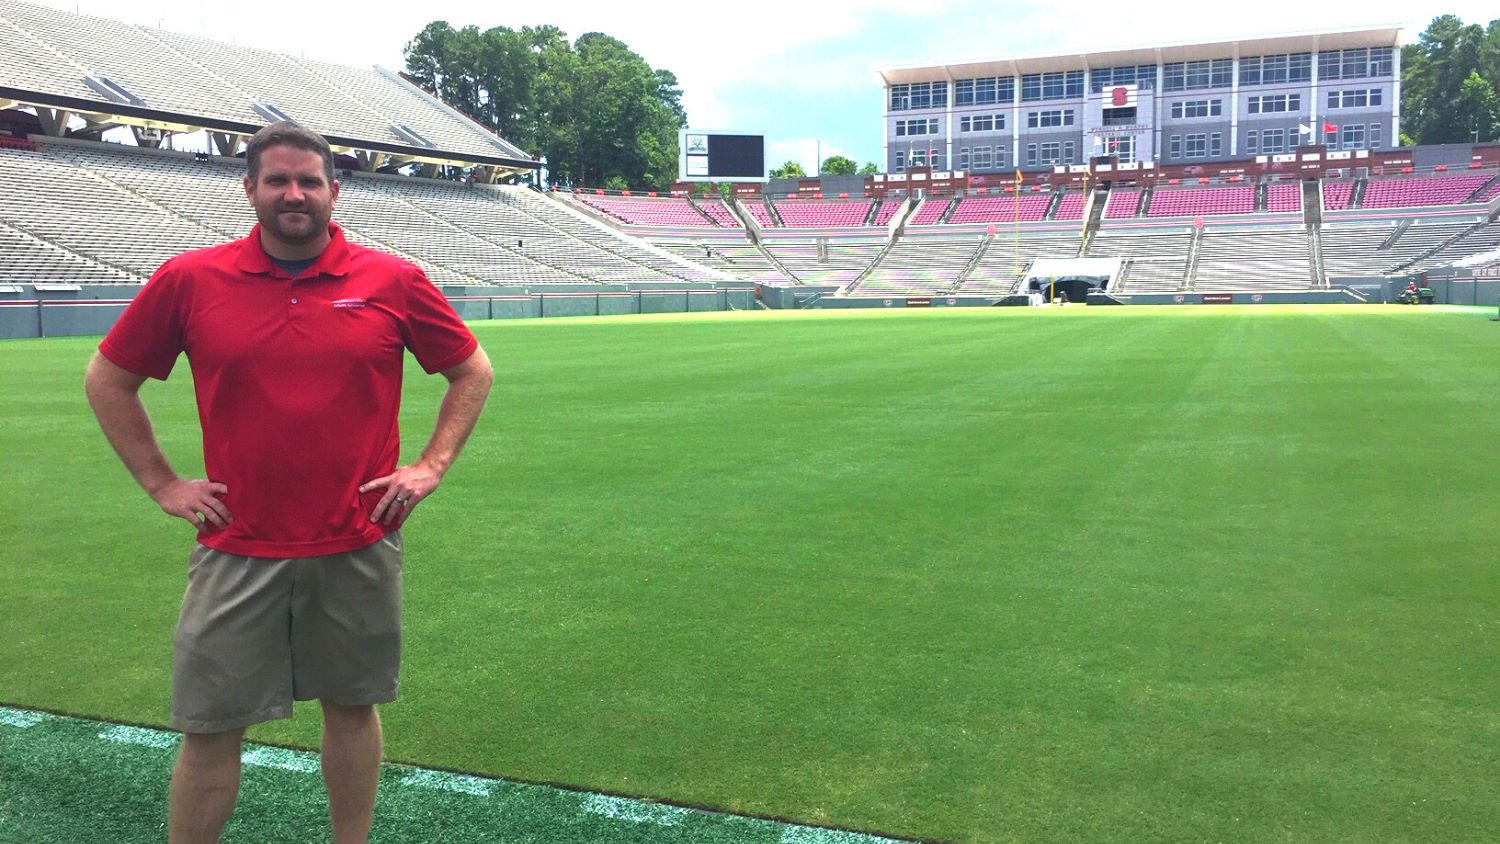 Master of Science in Biological and Agricultural Engineering student Jonathan Stephens poses for a photo at Carter-Finley Stadium.